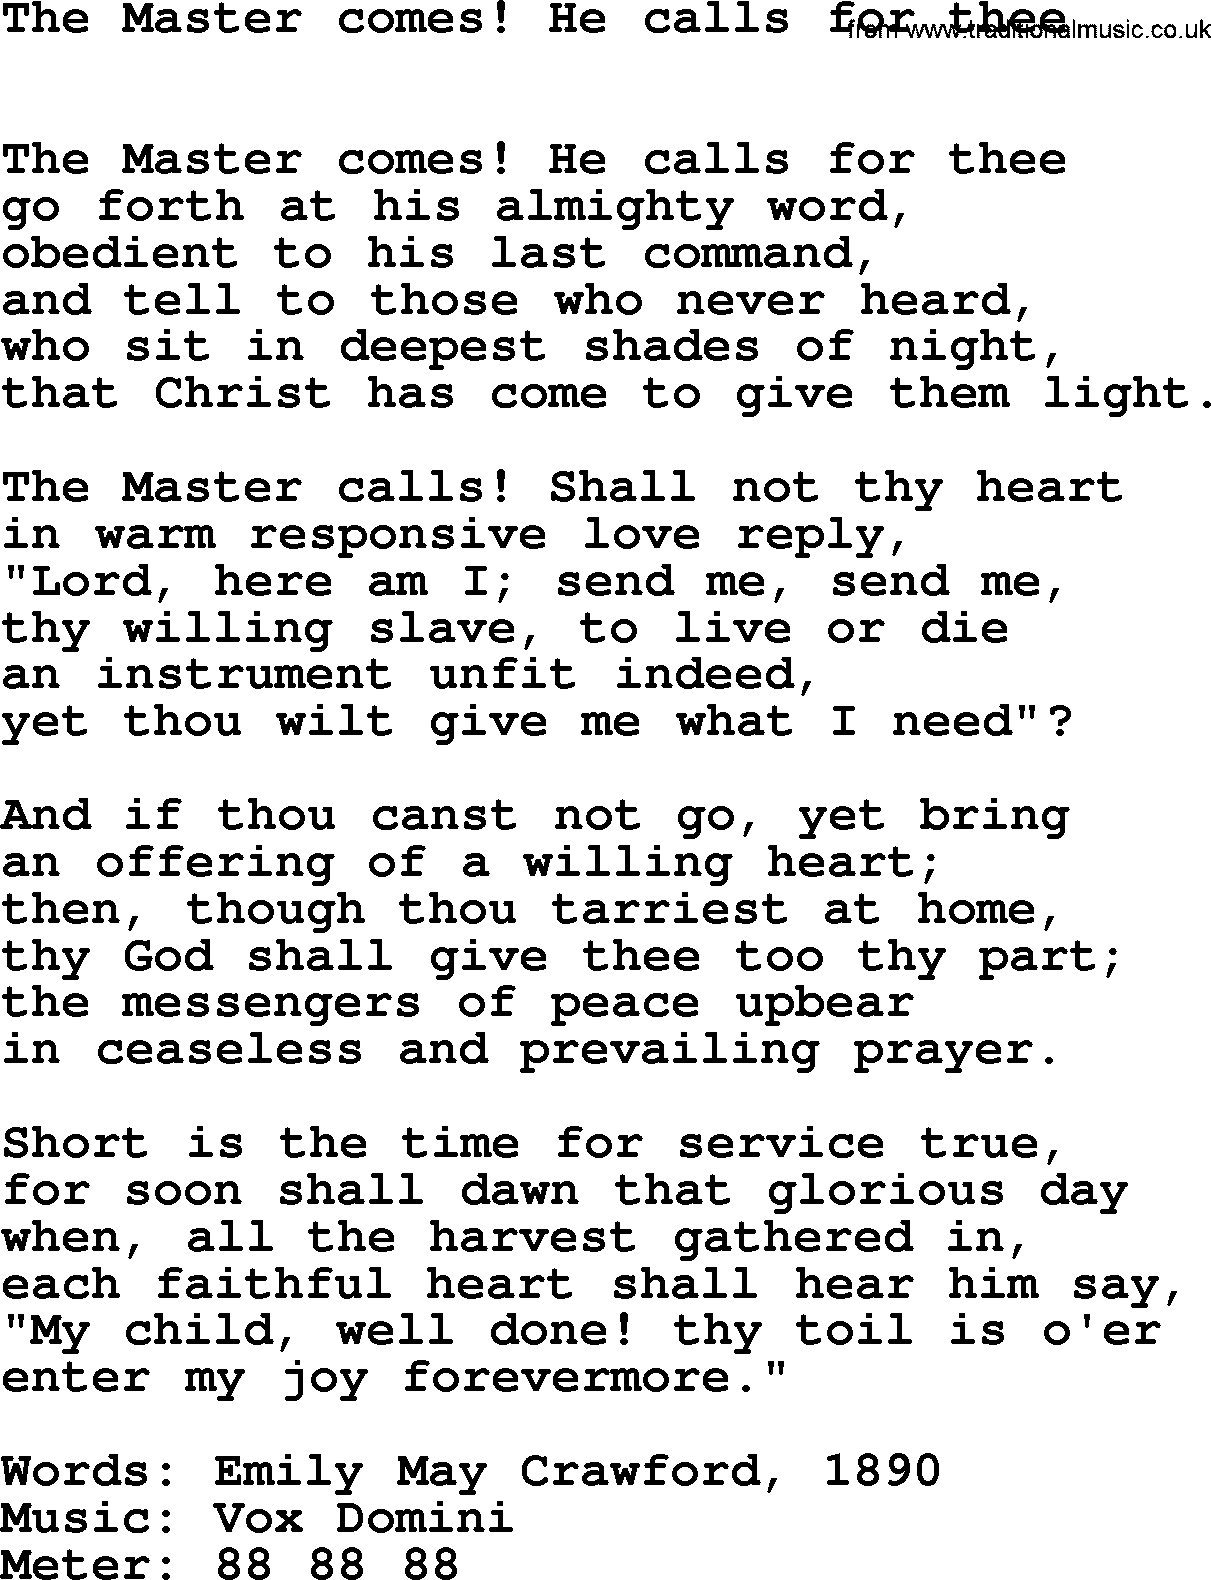 Book of Common Praise Hymn: The Master Comes! He Calls For Thee.txt lyrics with midi music